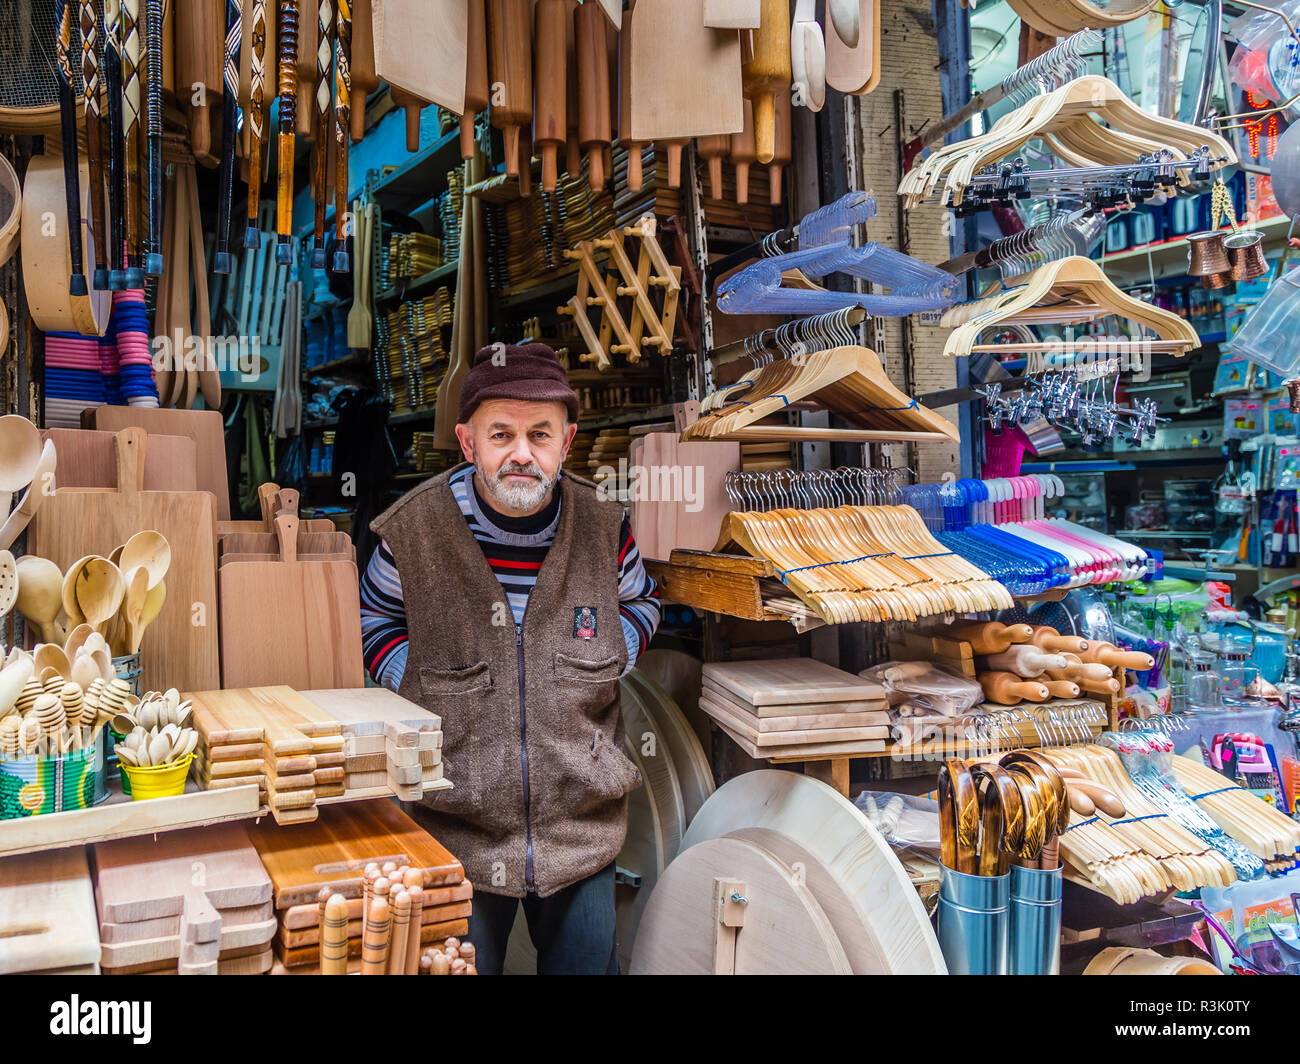 Istanbul, Turkey, Fecruary 23, 2013: Man selling wooden goods from a shop in Eminonu. Stock Photo